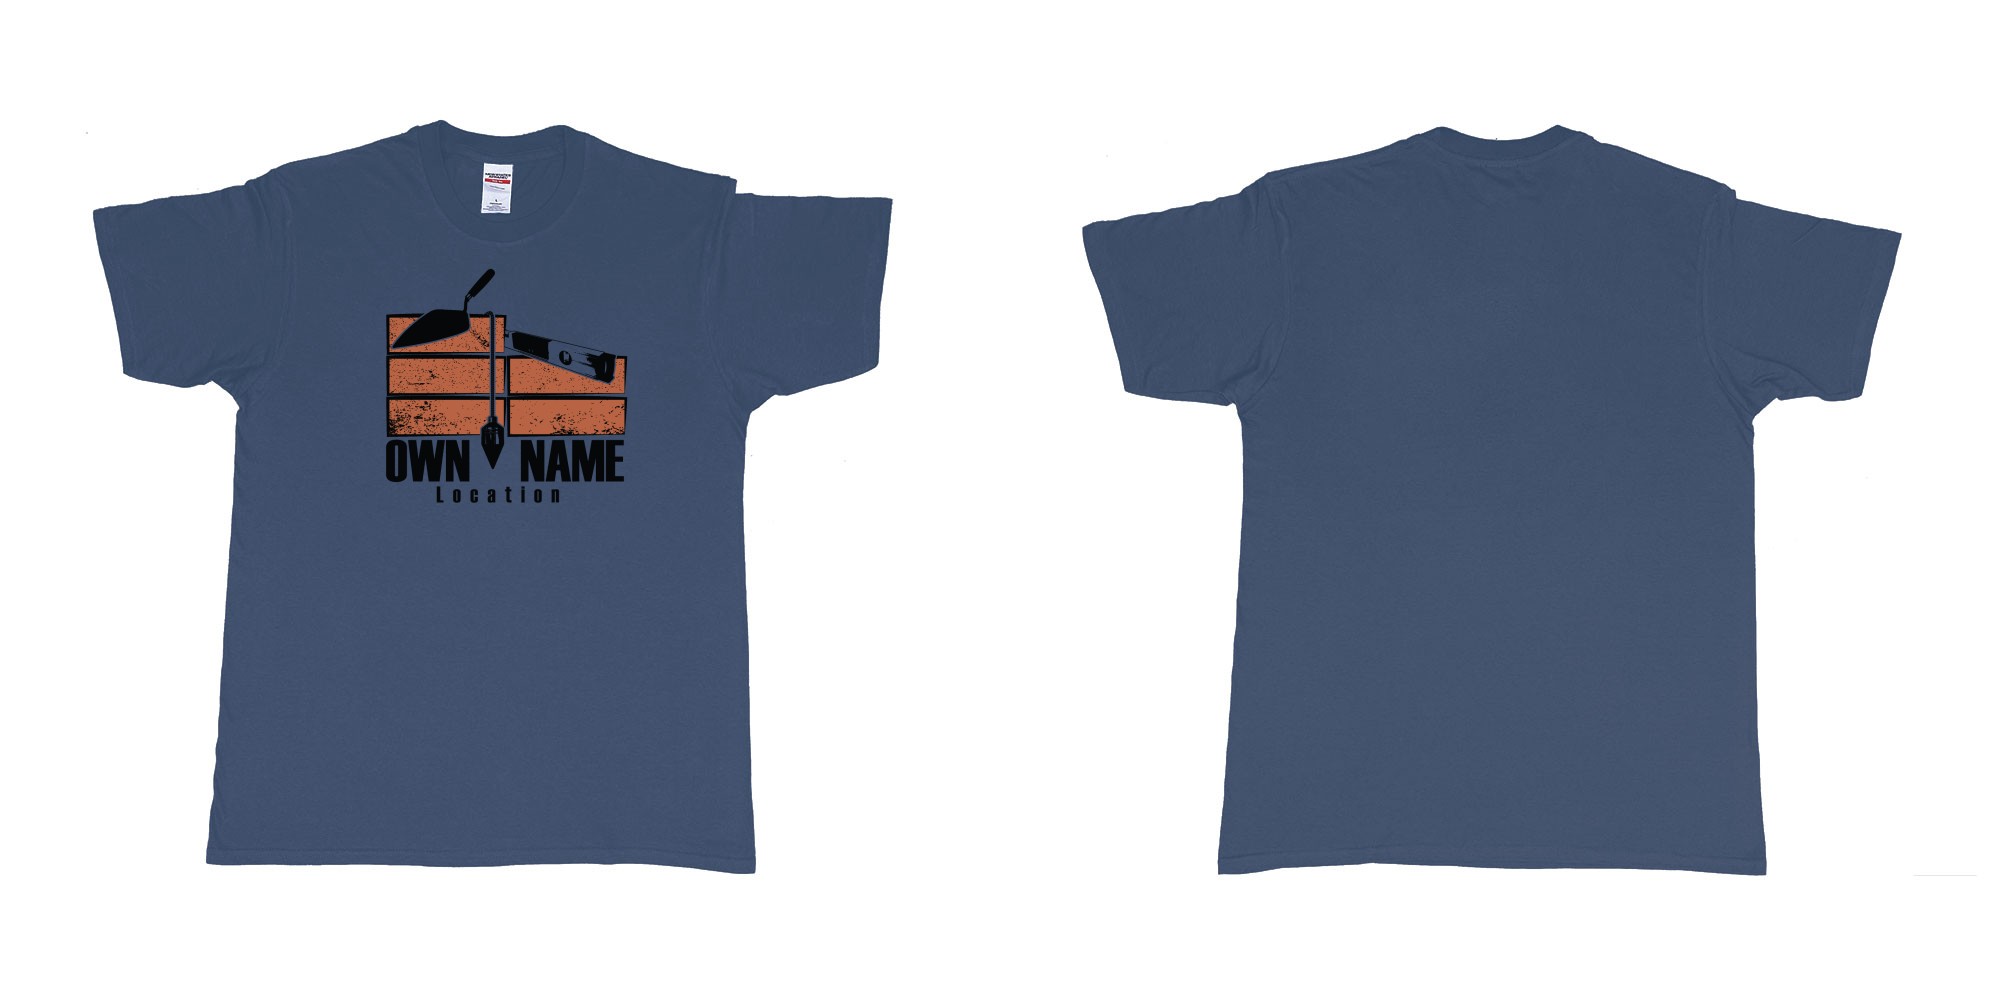 Custom tshirt design brick layer builder own custom company printing name location trowel in fabric color navy choice your own text made in Bali by The Pirate Way